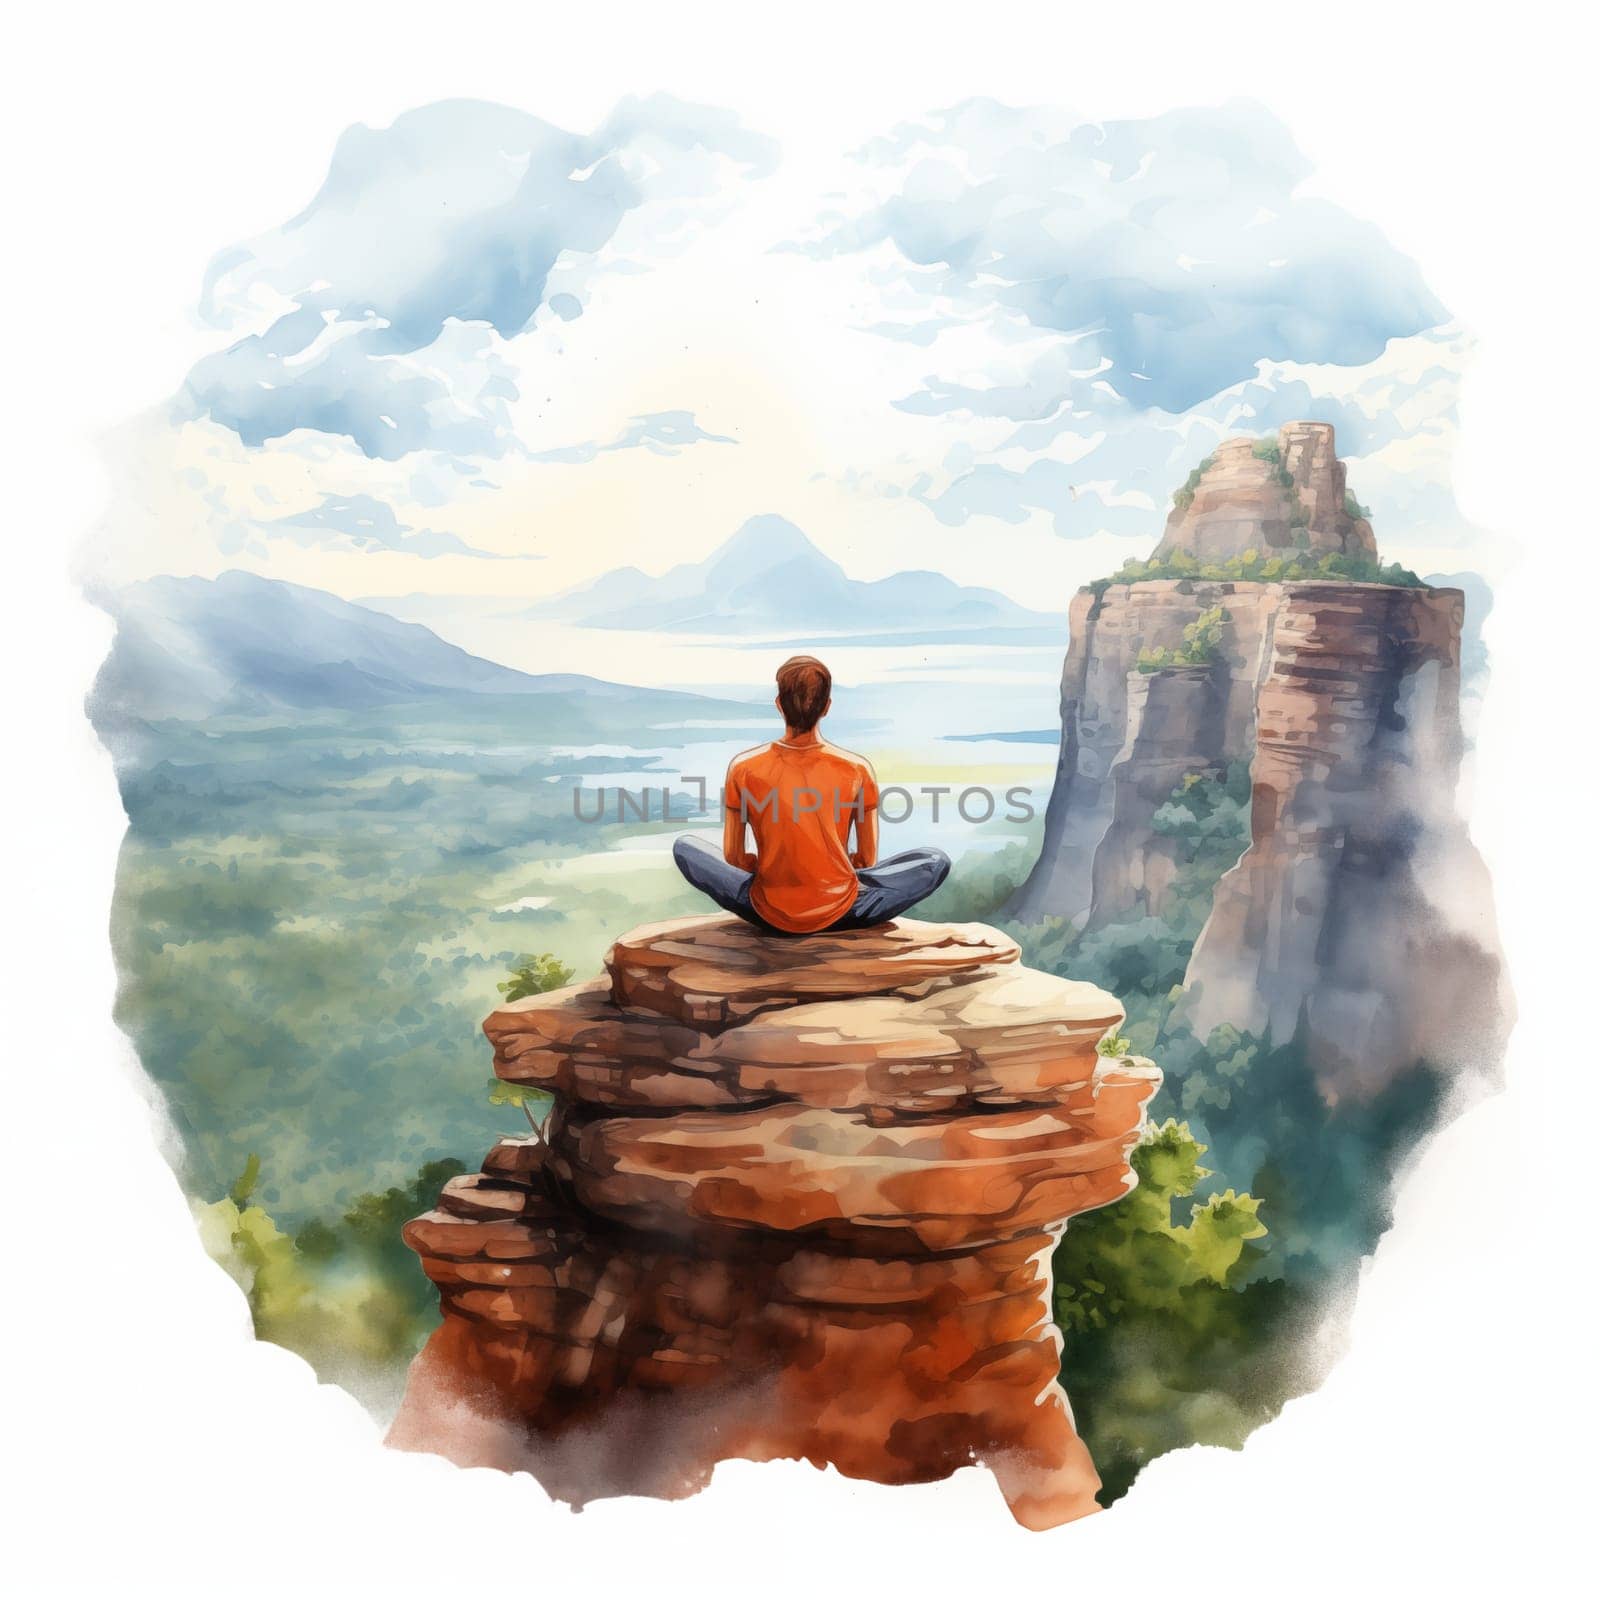 Man meditates on cliff's edge, legs crossed, overlooking clouds, forests, and rocks. Watercolor illustration on white background, capturing the serenity of meditation amidst nature's grandeur. by veronawinner